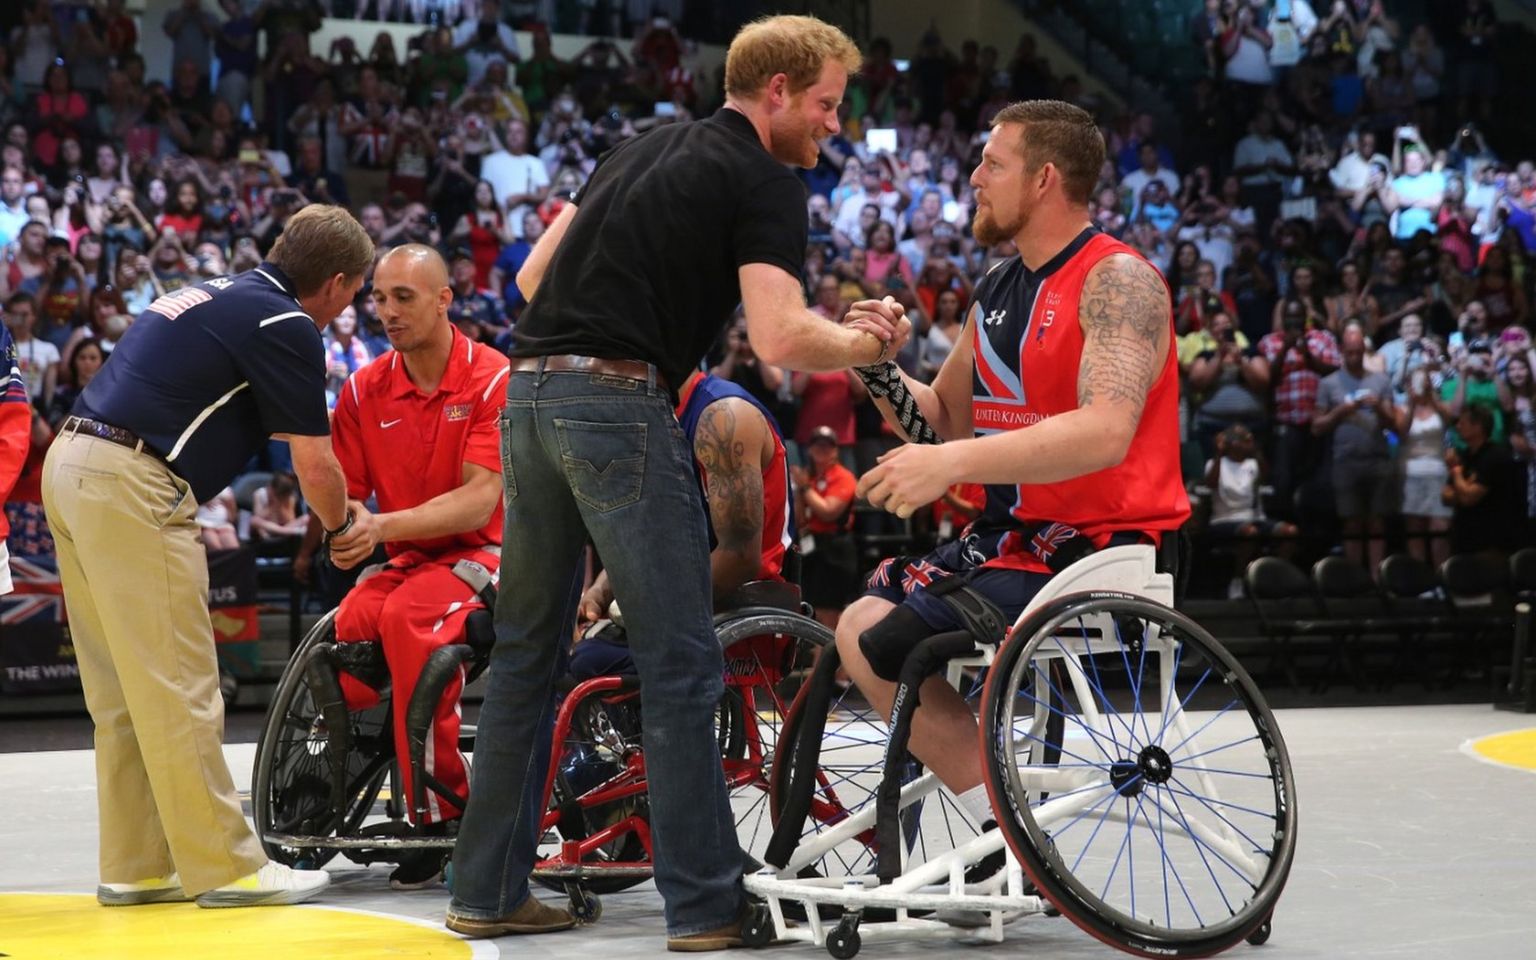 Prince Harry meets wheelchair athletes in 2016 in Orlando, Florida